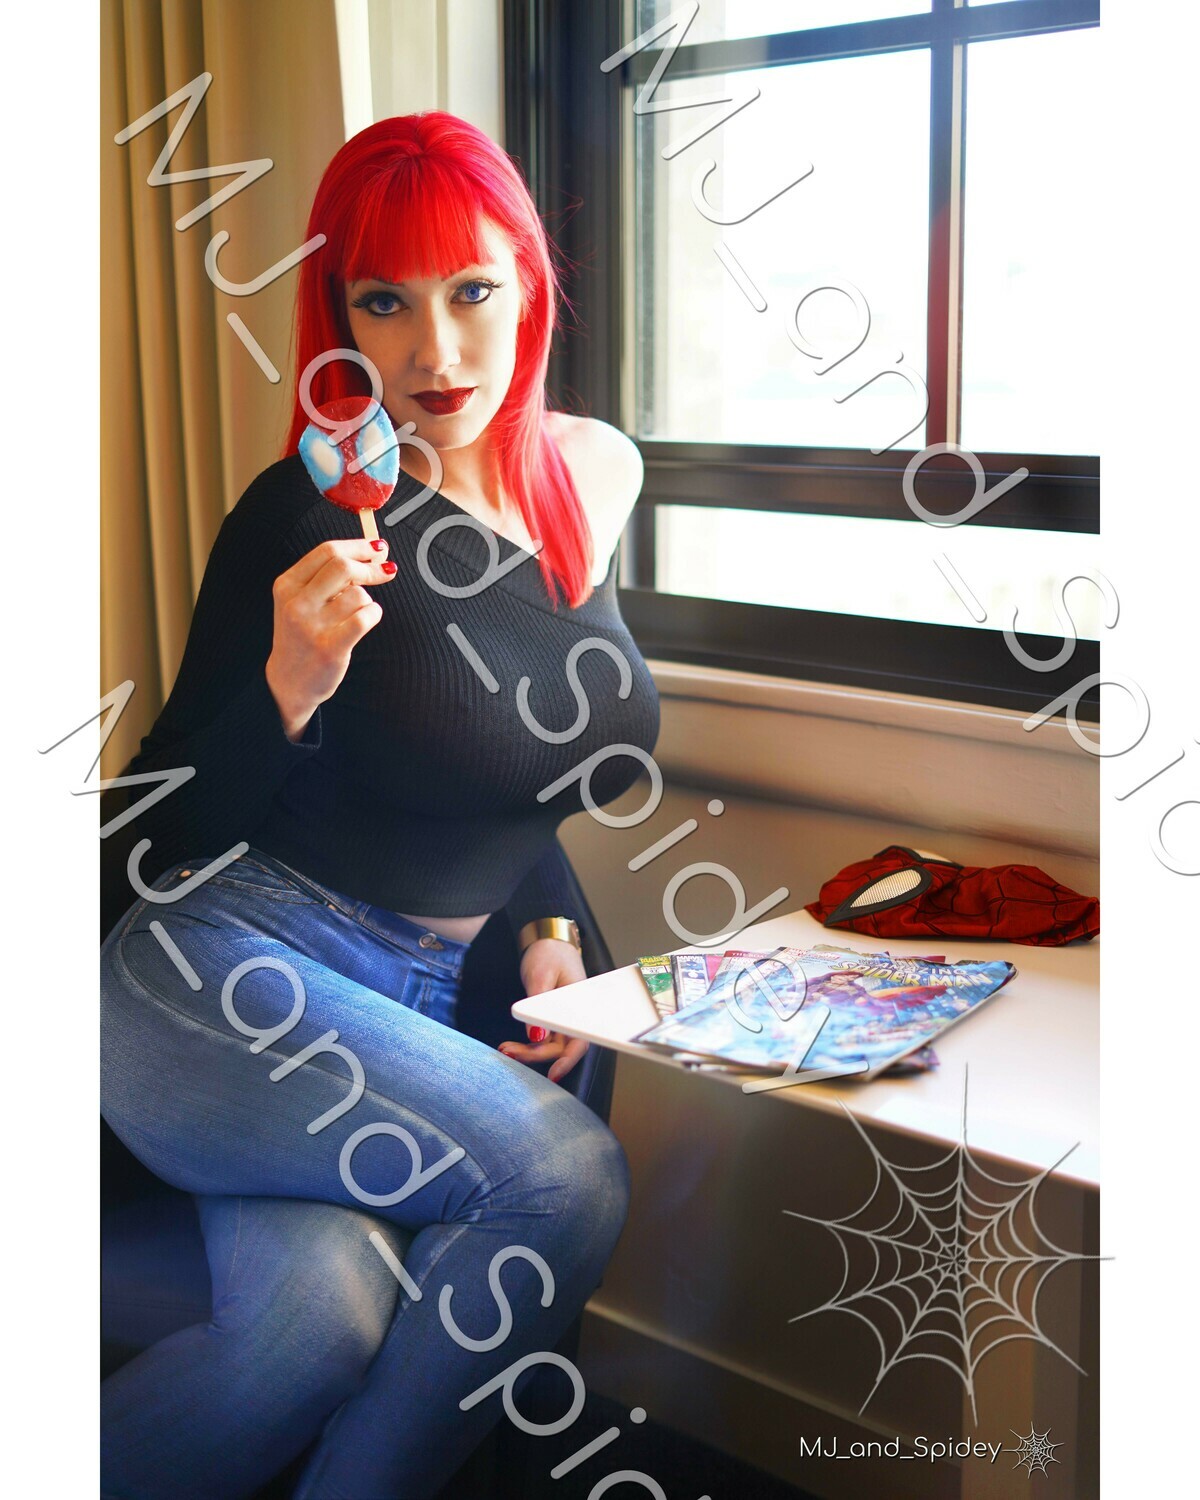 Marvel - Spider-Man - Mary Jane Watson - Popsicle 1 -  Cosplay Print (@MJ_and_Spidey, MJ and Spidey, Comics)